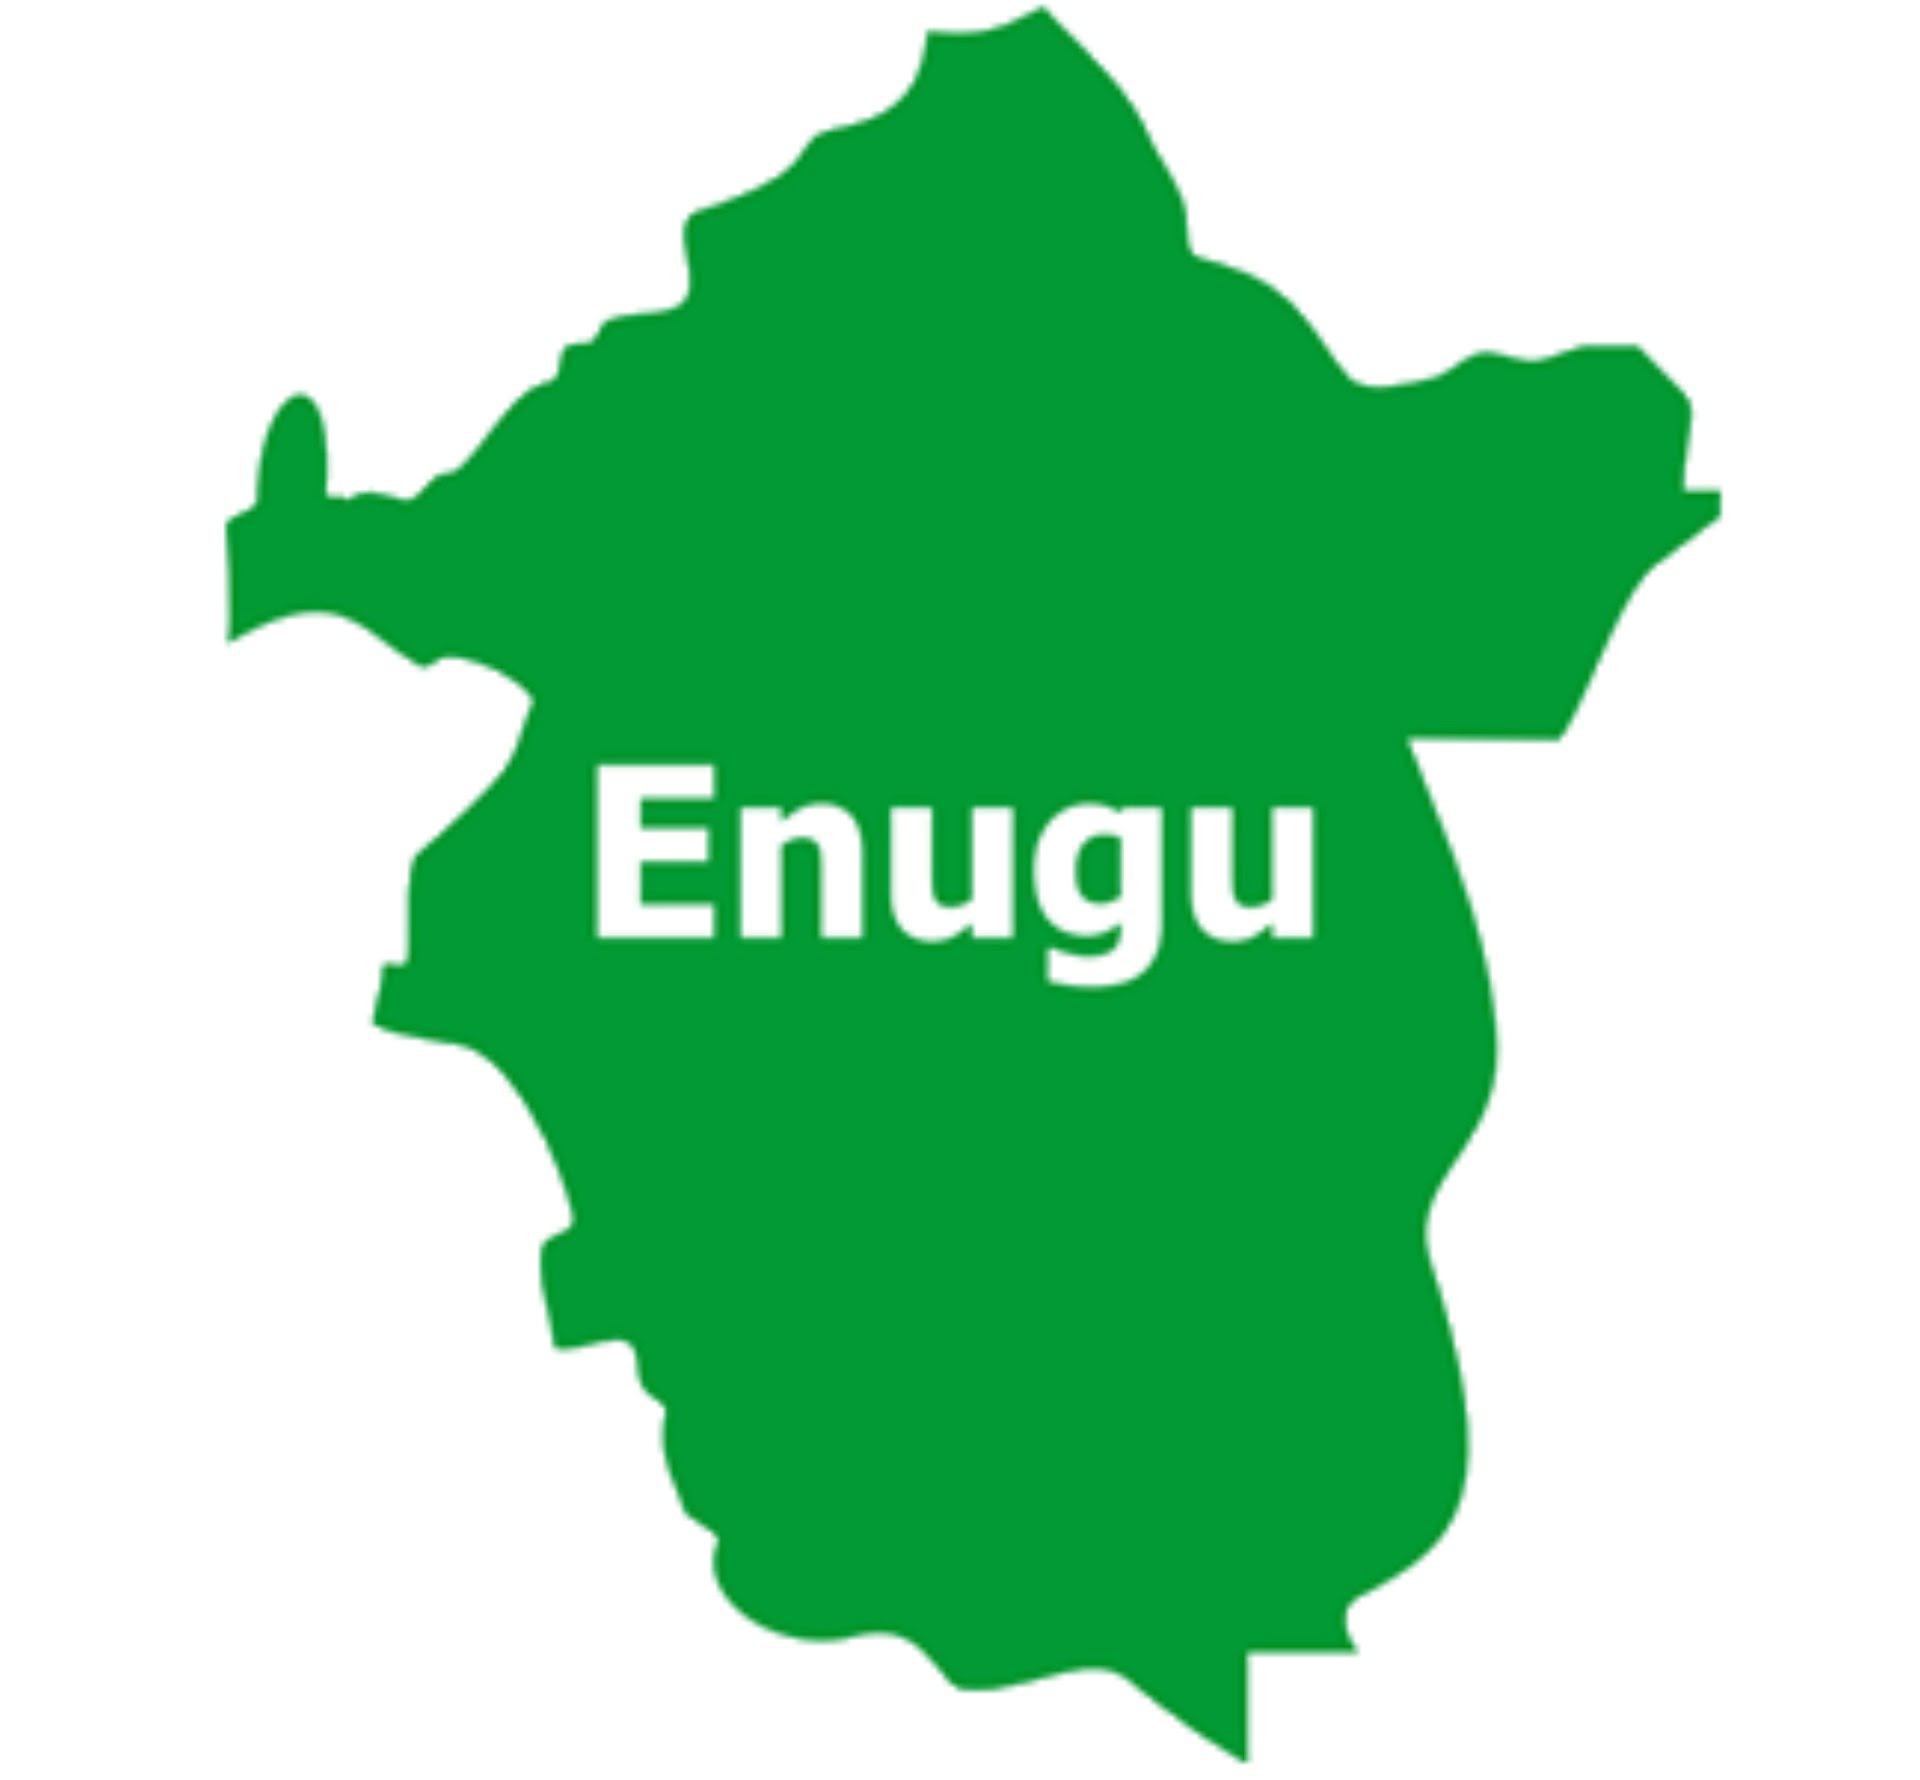 Nigeria news : Agriculture: APPEALS project takes midterm stock in Enugu